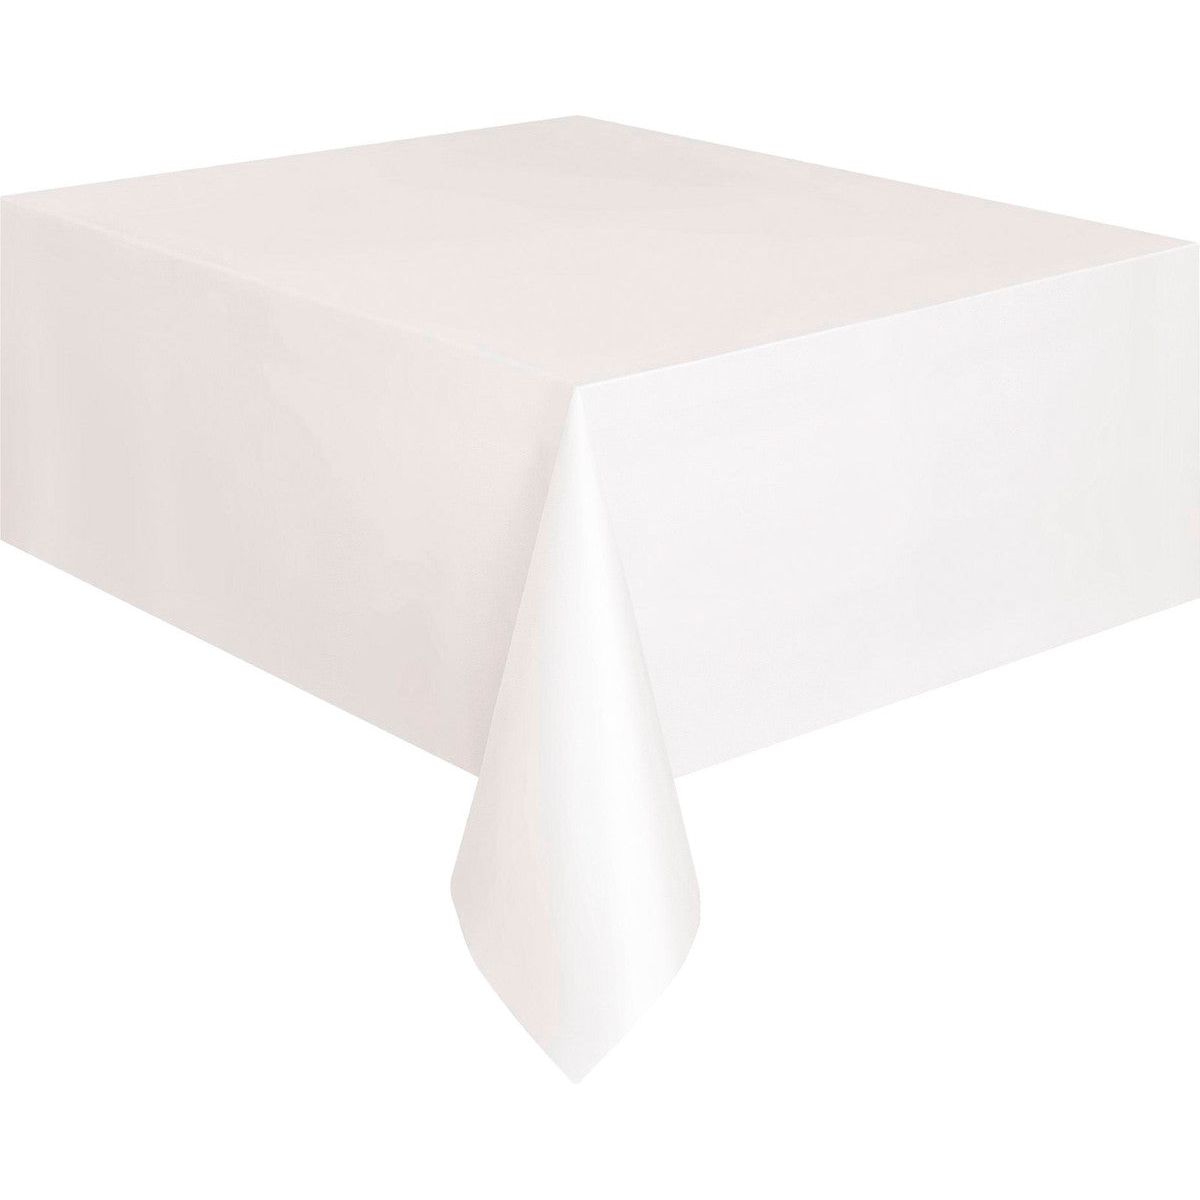 Plastic Tablecover - White